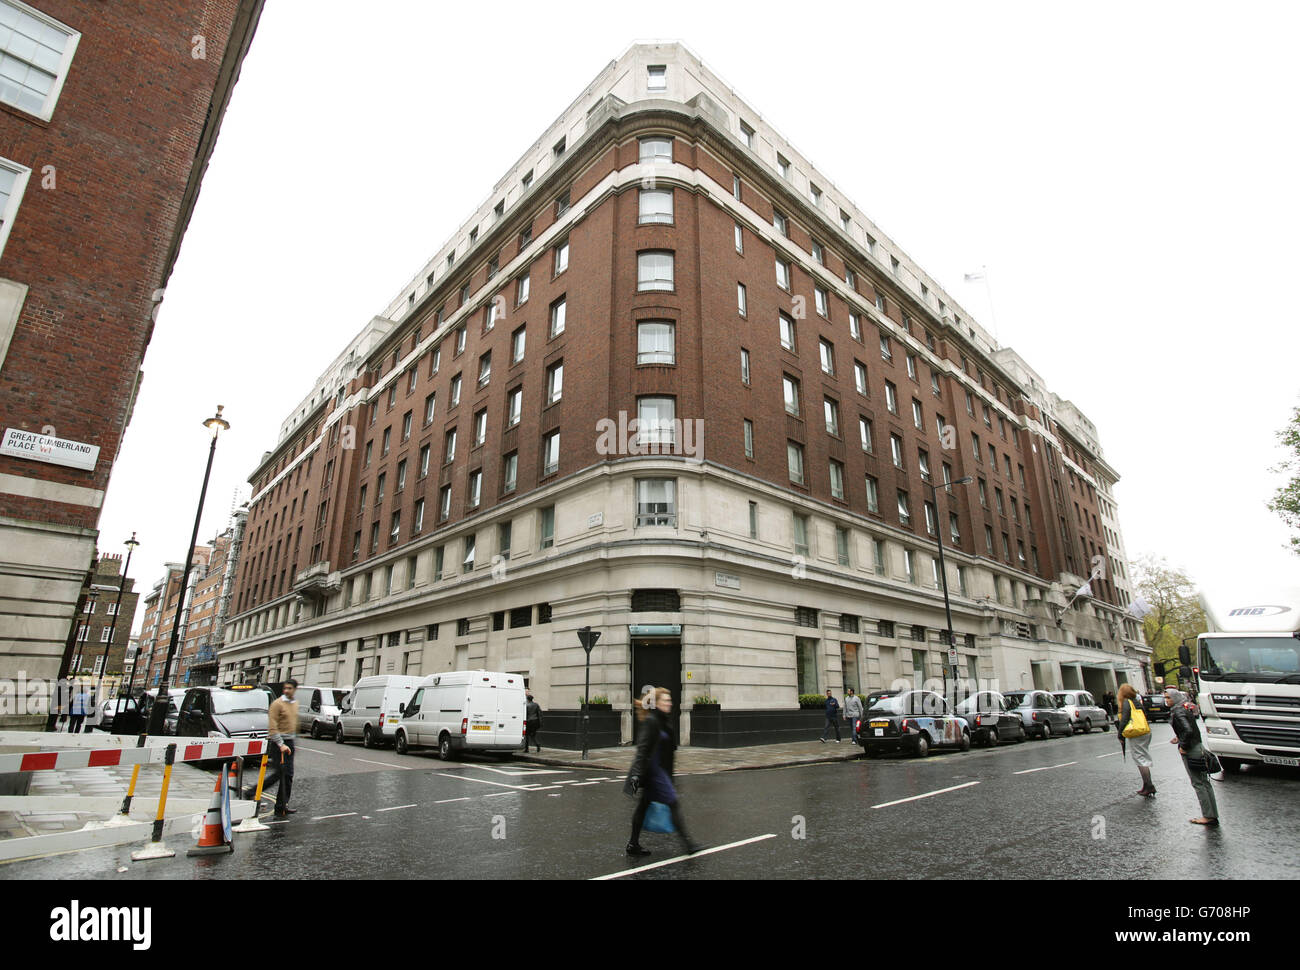 The Cumberland Hotel in central London, where three women were attacked ...